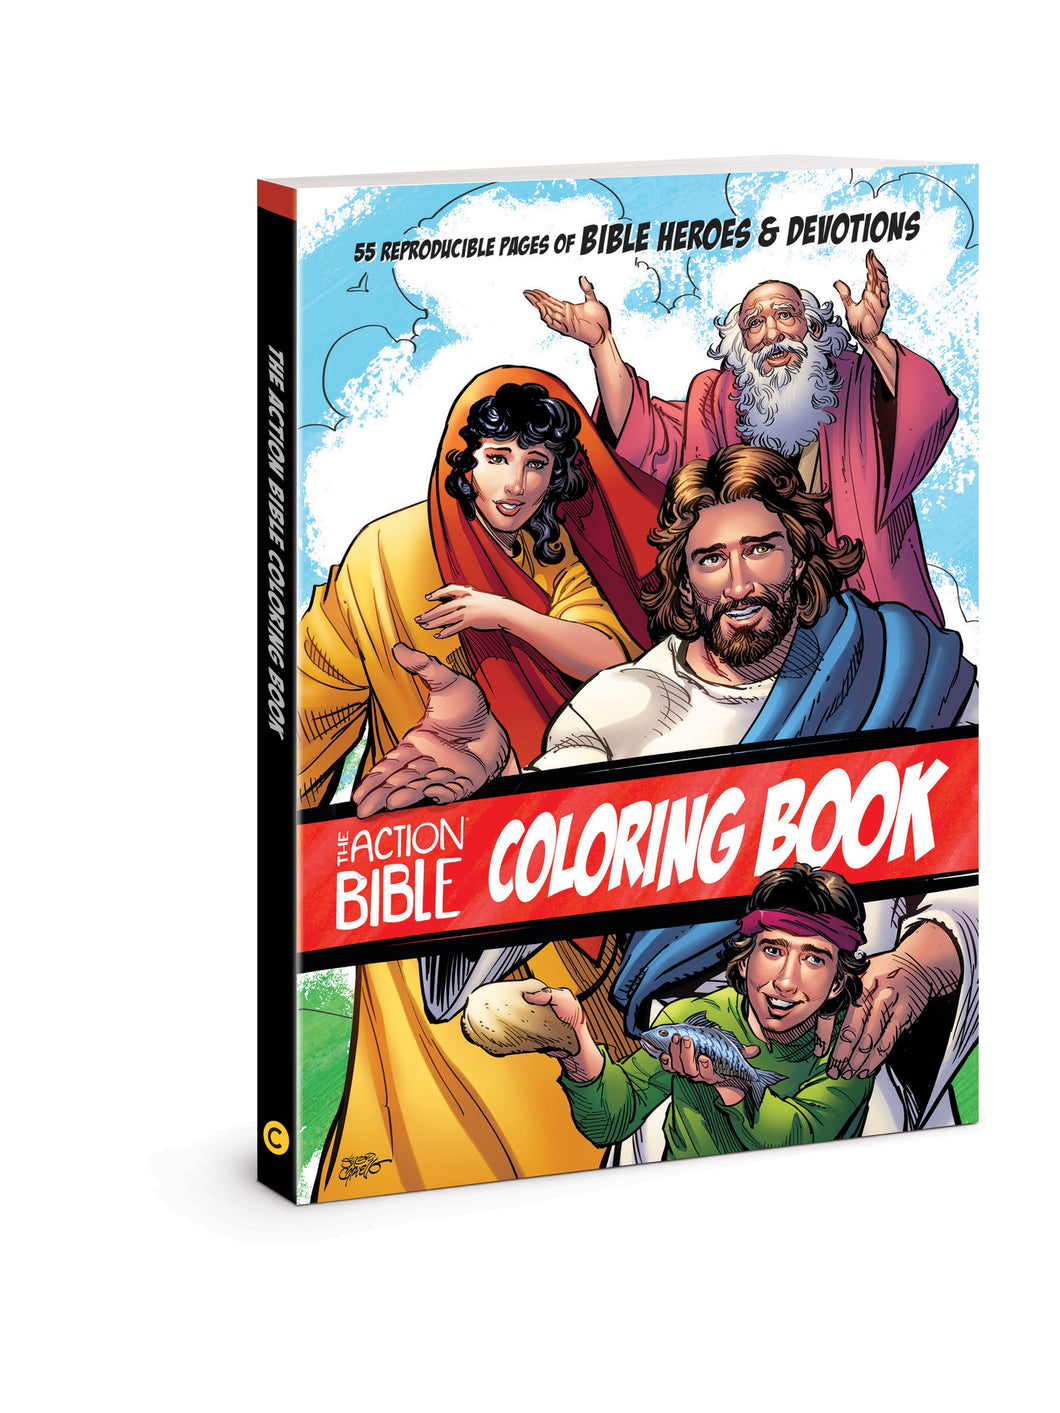 The Action Bible Coloring Book (#144661)